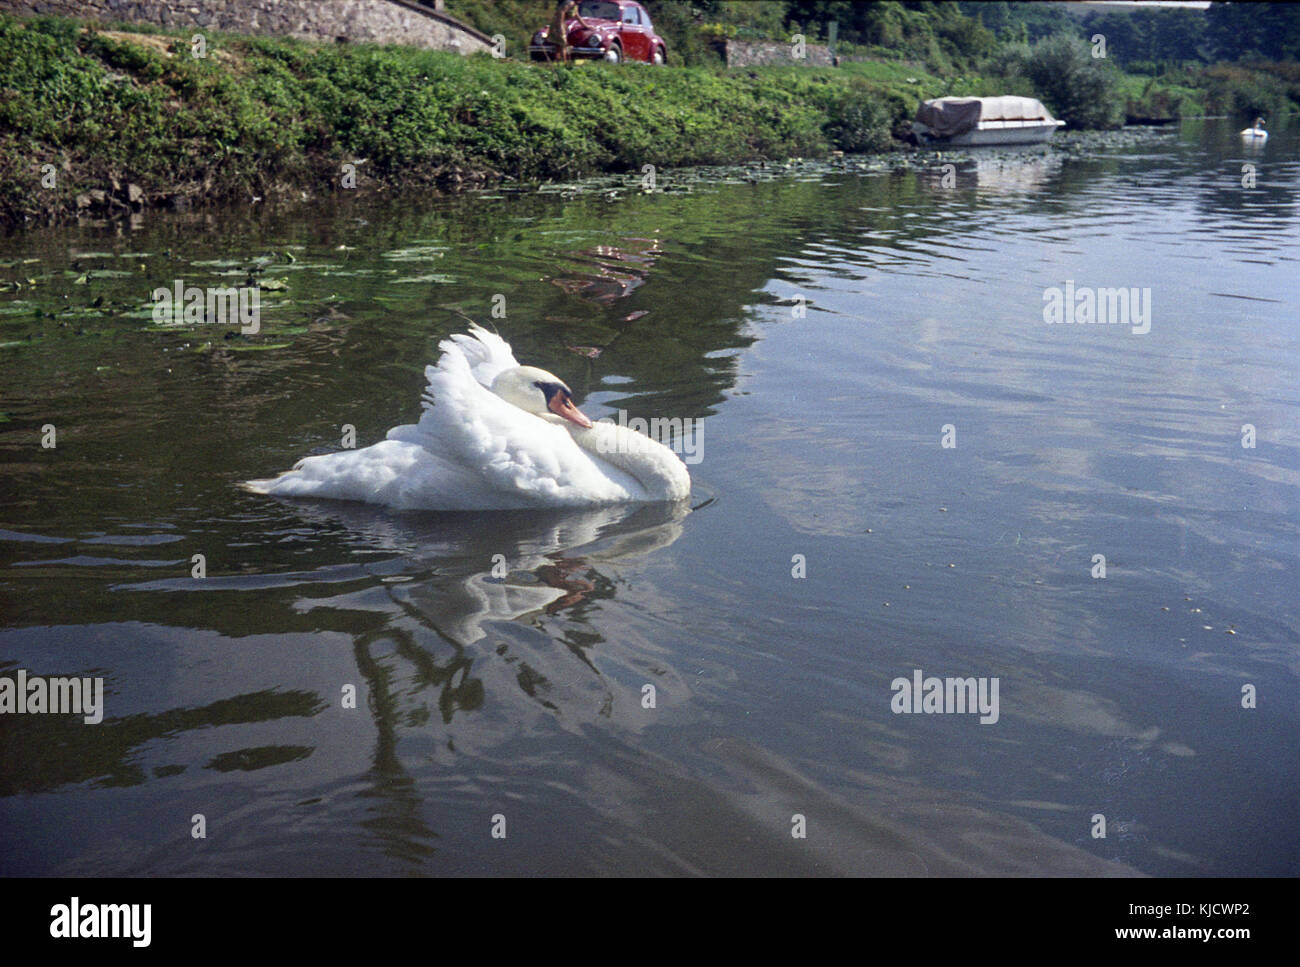 hi-res photography stock images and Alamy see Schwan auf -